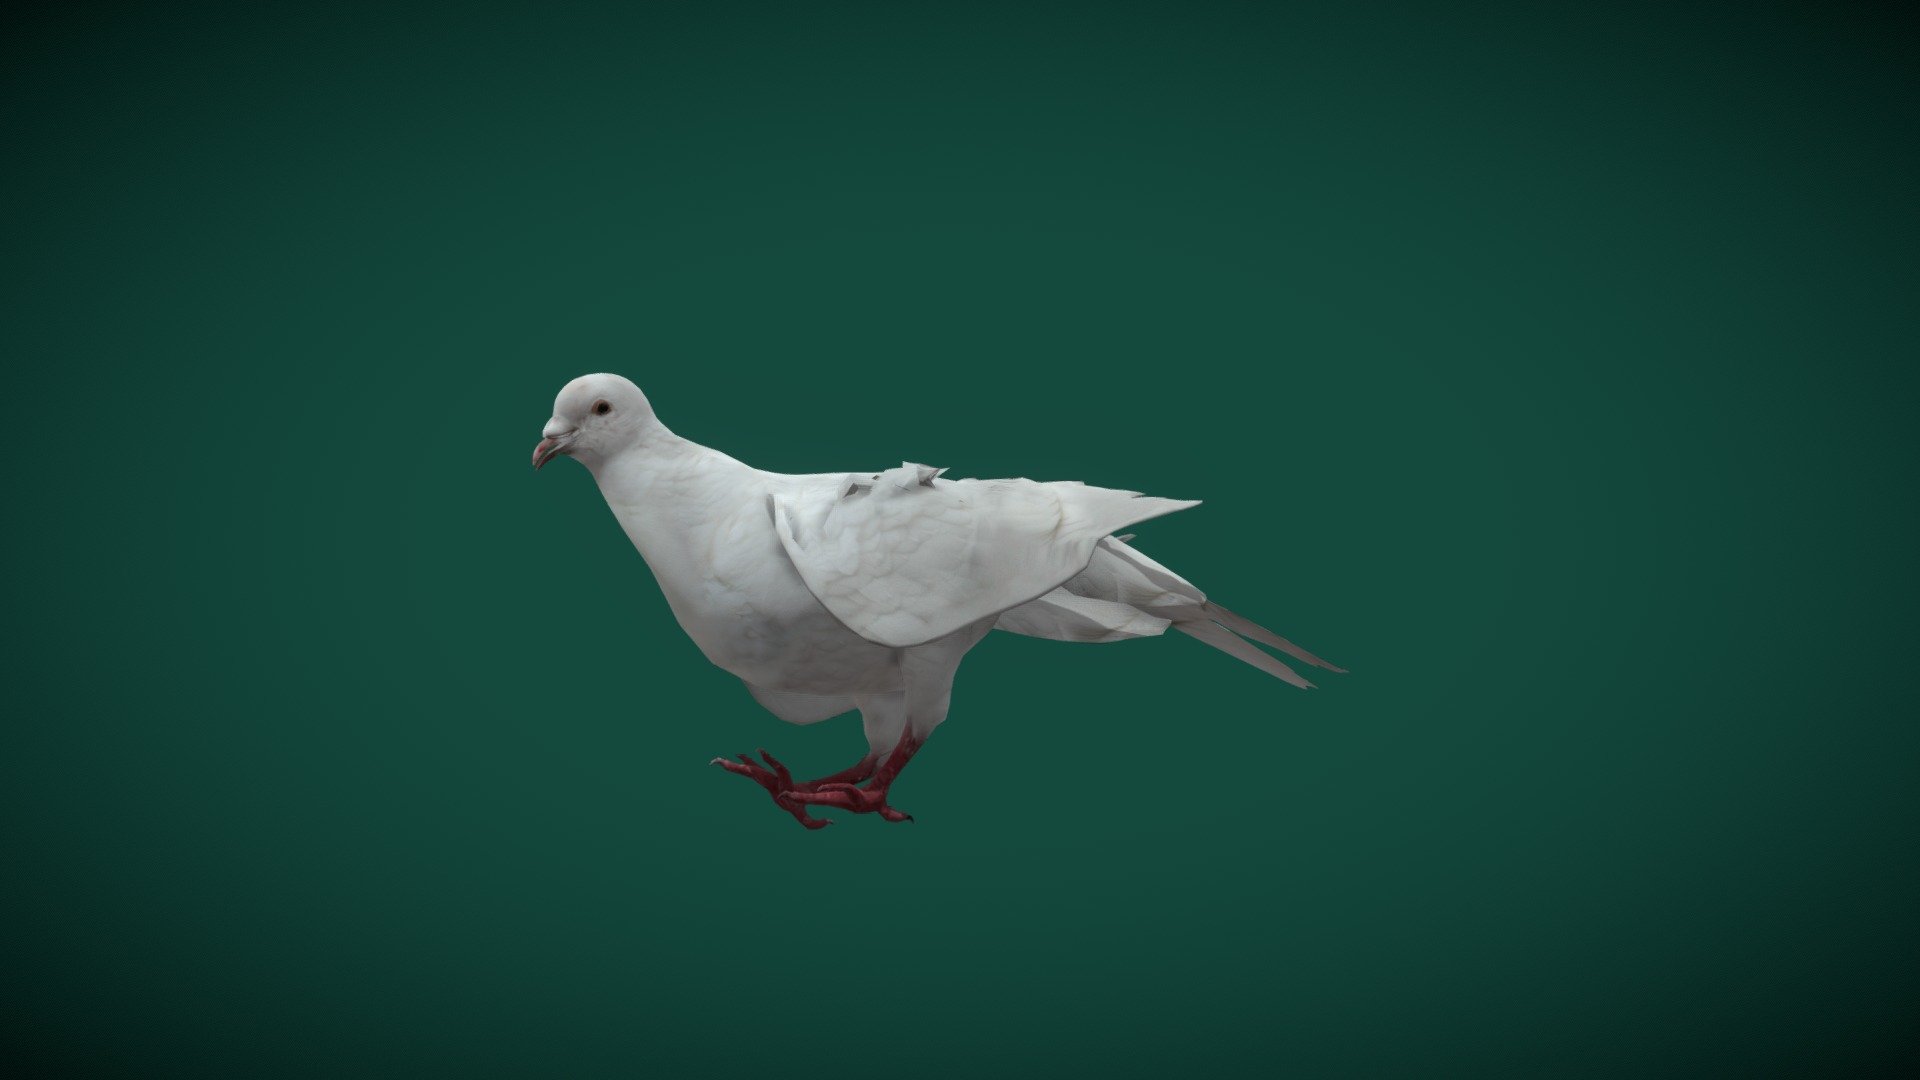 Better with smooth corrective Turn on




White Dove ( Columbidae Birds )Dove And Pigeon

Stout-Bodied Birds  Animal   (Squab,Squeaker) animalia

1 Draw Calls

Lowpoly

GameReady

9 Animations 4K PBR Textures Material

Unreal FBX (Unreal 4,5 Plus)

Unity FBX  

Blend File 

USDZ File (AR Ready). Real Scale Dimension

Textures Files

GLB File (Unreal 5.1  Plus Native Support)

Gltf File ( Spark AR, Lens Studio(SnapChat) , Effector(Tiktok) , Spline, Play Canvas ) Compatible

Triangles : 10306

Vertices  : 5261

Faces     : 5314

Edges     : 10578
 Diffuse, Metallic, Roughness , Normal Map ,Specular Map,AO

Columbidae is a bird family consisting of doves and pigeons. It is the only family in the order Columbiformes. These are stout-bodied birds with short necks and short slender bills that in some species feature fleshy ceres. They primarily feed on seeds, fruits, and plants.
 Columbidae
 - Columbidae Dove (Lowpoly) - Buy Royalty Free 3D model by Nyilonelycompany 3d model